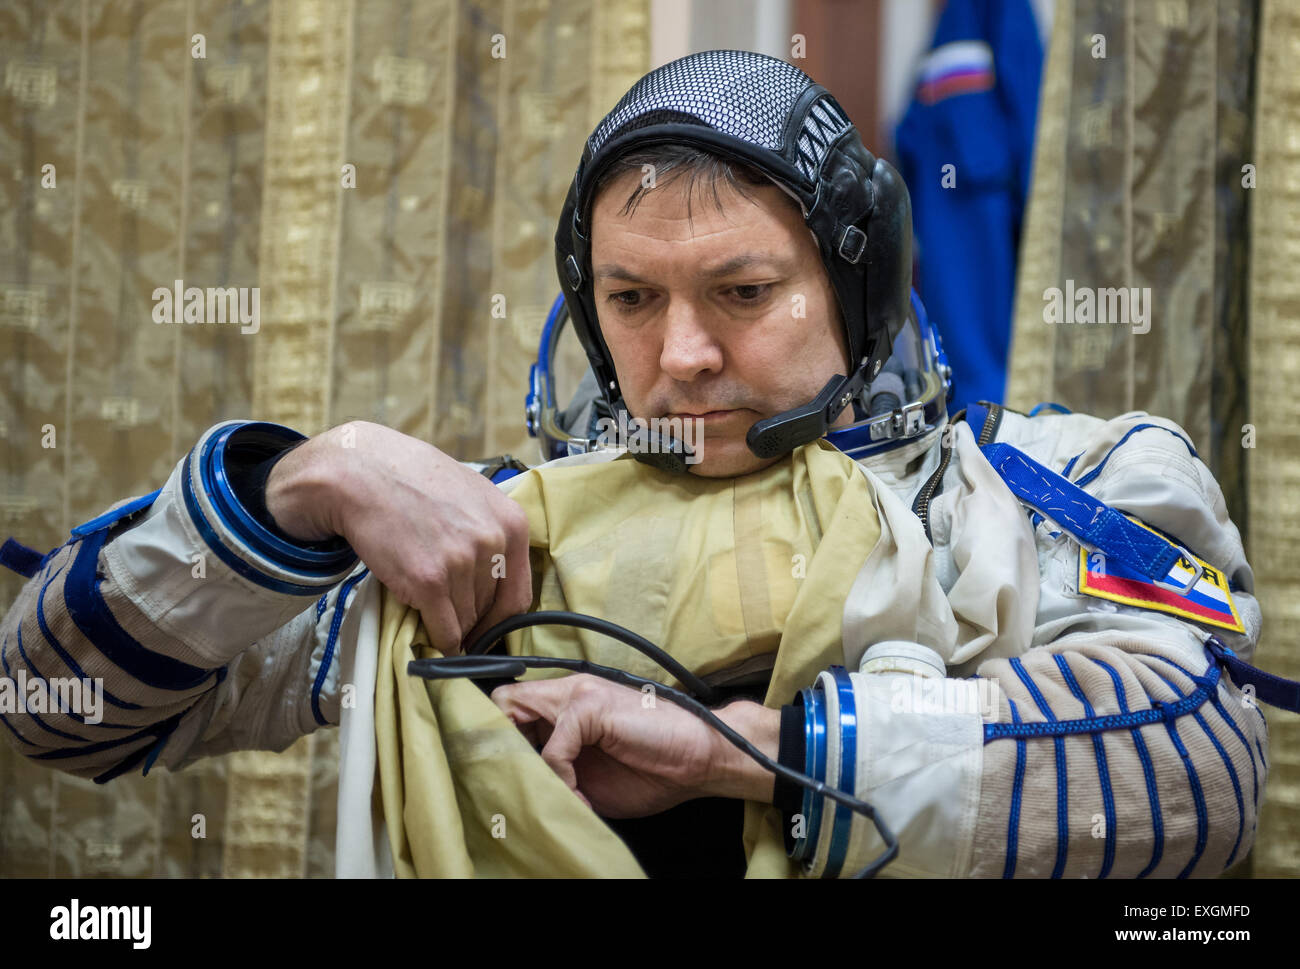 Russian cosmonaut Oleg Kononenko participates in the second day of qualification exams with NASA astronaut Kjell Lindgren, and Japan Aerospace Exploration Agency (JAXA) astronaut Kimya Yui, Thursday, May 7, 2015 at the Gagarin Cosmonaut Training Center (GCTC) in Star City, Russia. The Expedition 44/45 trio is preparing for launch to the International Space Station in their Soyuz TMA-17M spacecraft from the Baikonur Cosmodrome in Kazakhstan. Stock Photo